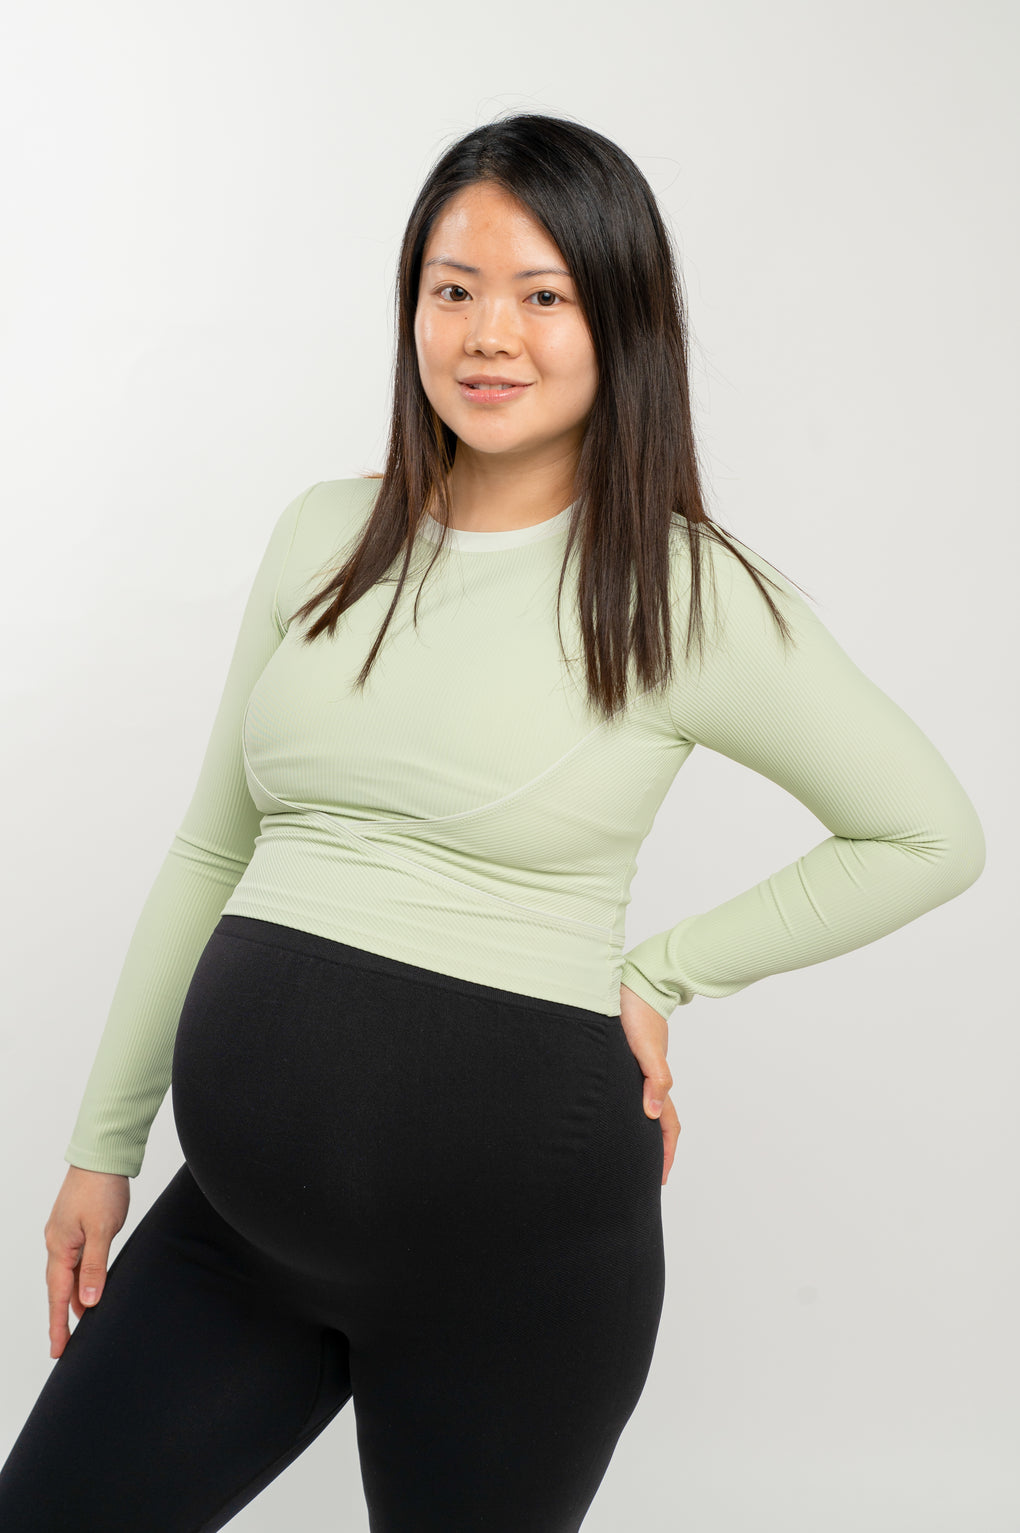 LMMYUN Women's Maternity Workout Leggings Over The Belly Pregnancy